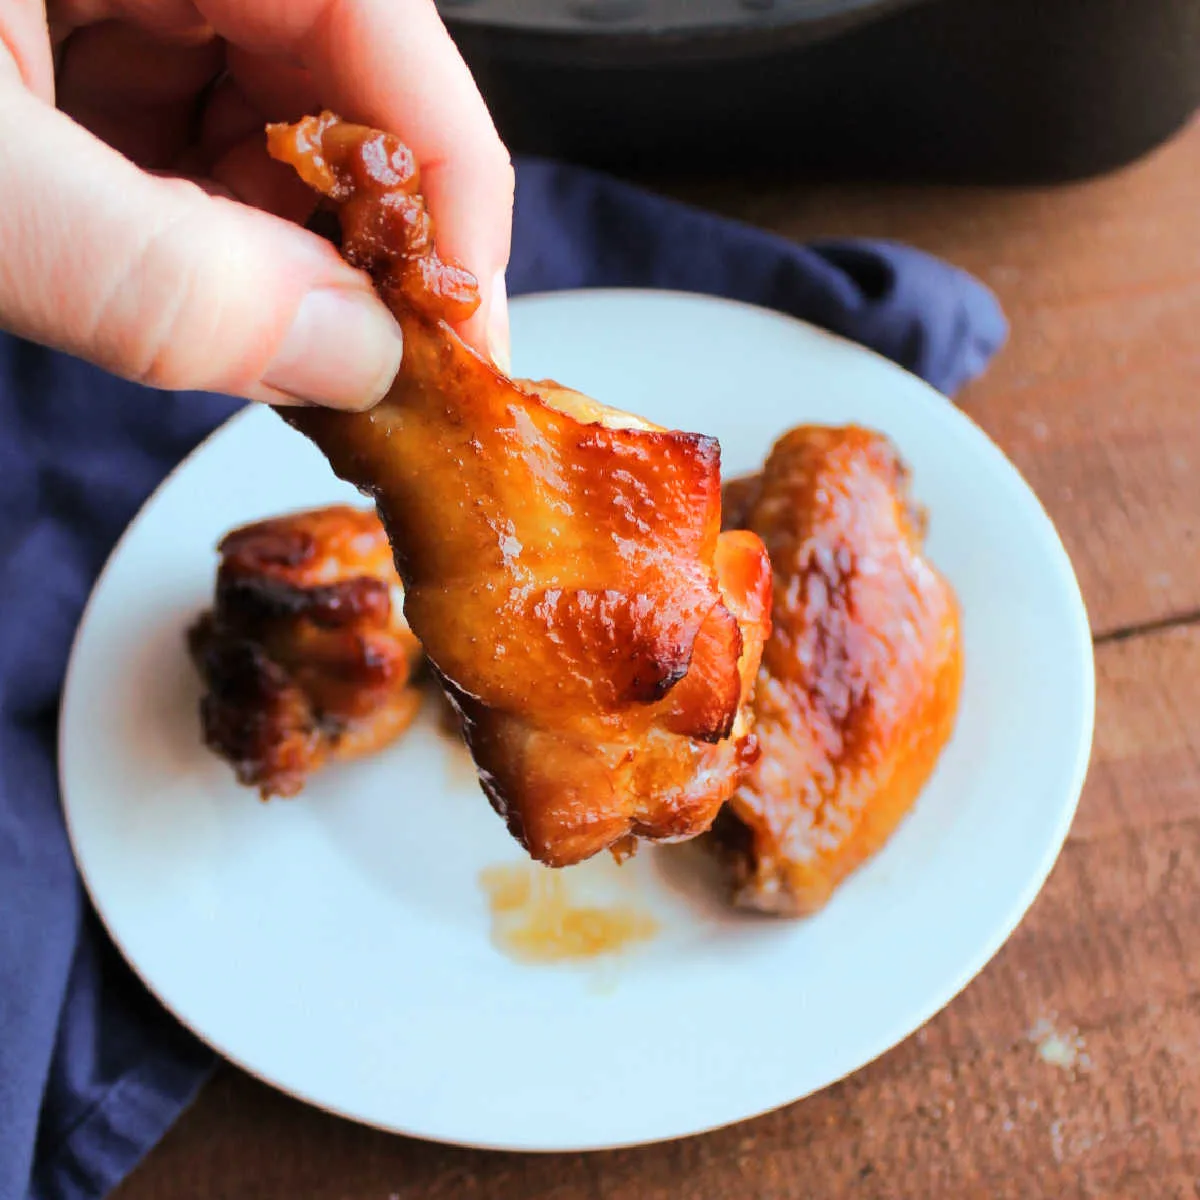 Hand holding golden brown chicken wing with sticky sauce on it.